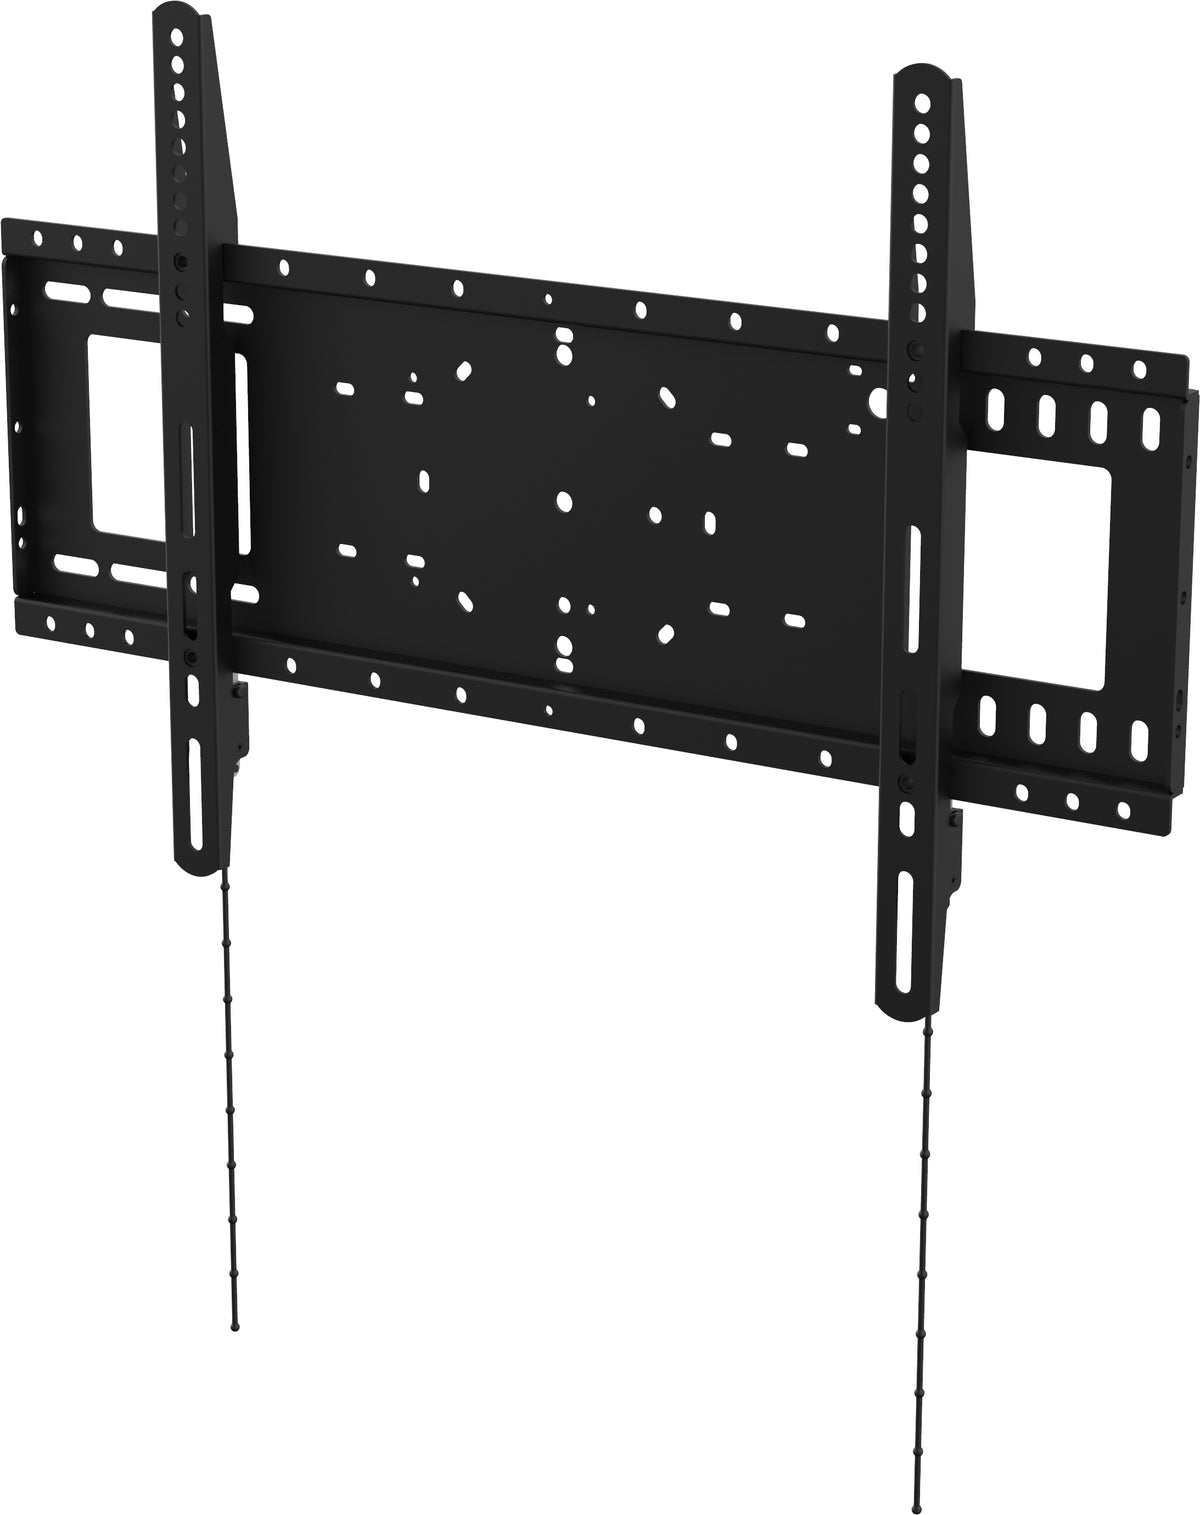 VISION Heavy Duty Display Wall Mount - LIFETIME WARRANTY - fits display 37-85" with VESA sizes up to 600 x 400 - non-tilting - suits interactive flat panels or LED TVs - arms latch securely - cold-rolled steel - media player fixing points - SWL 100 k